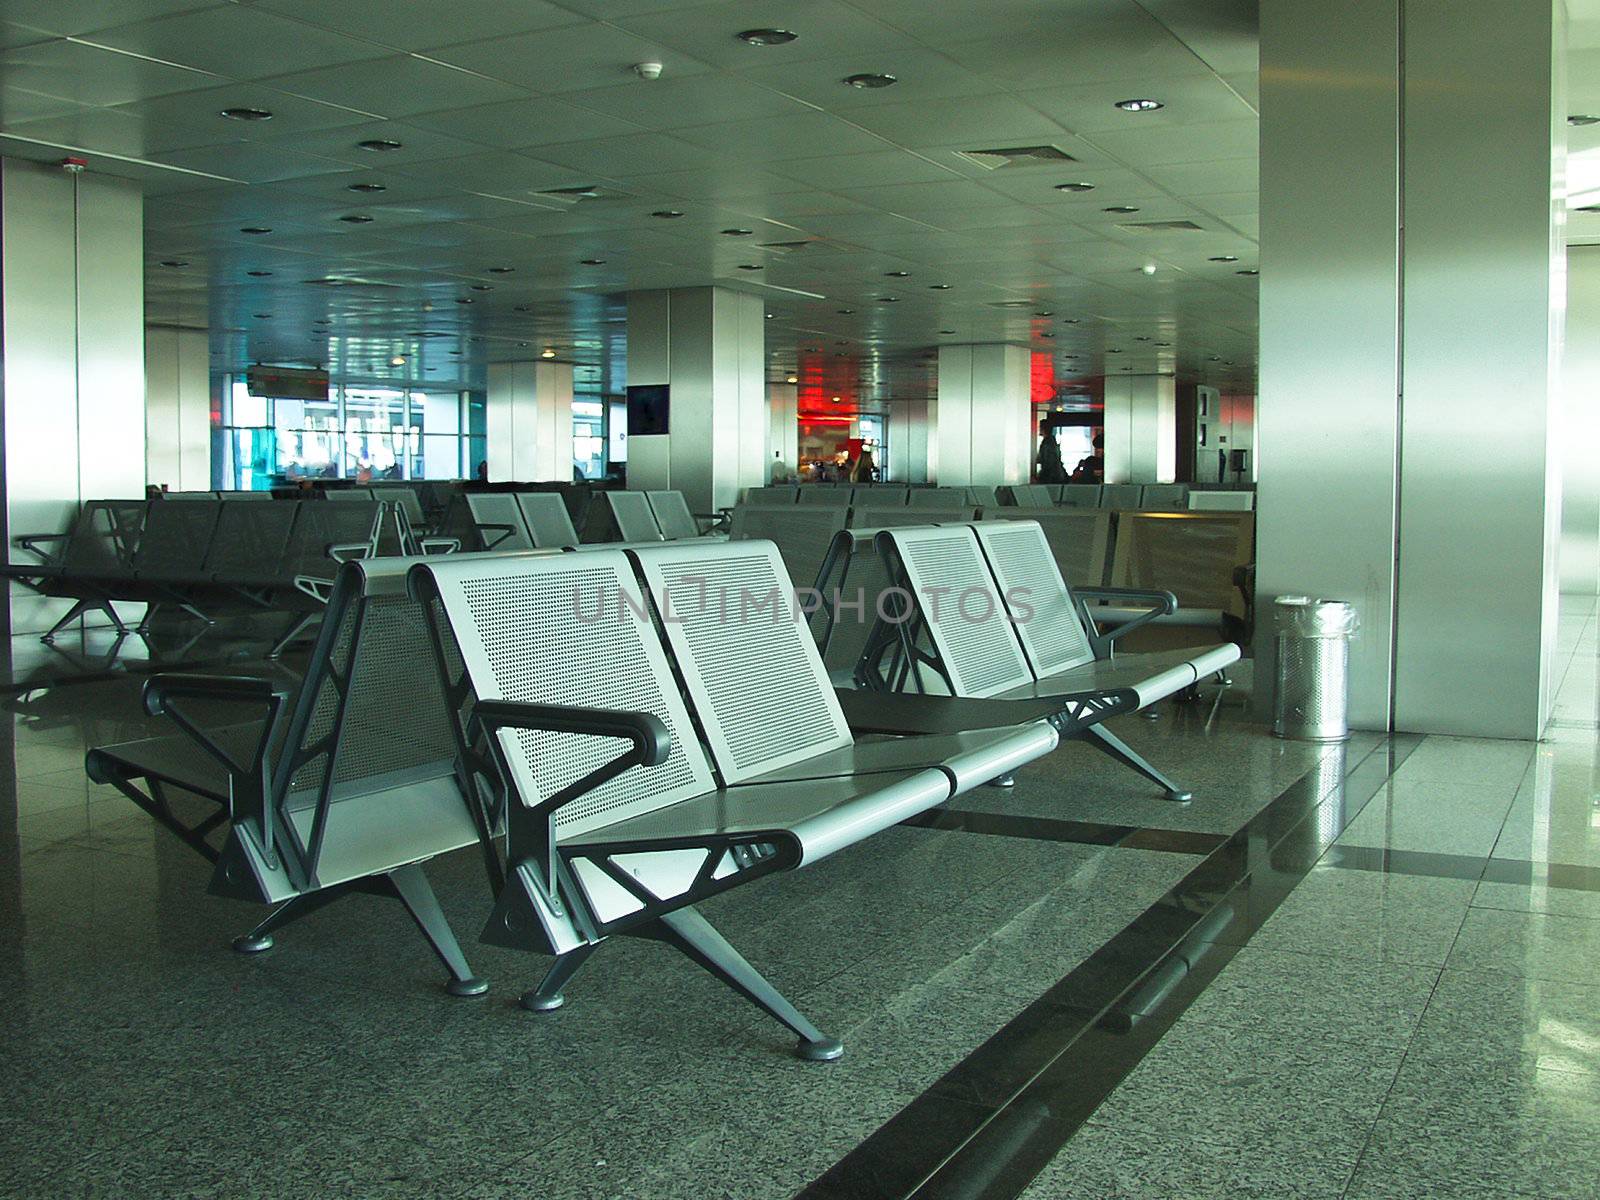 Rows of seats in airport lounge